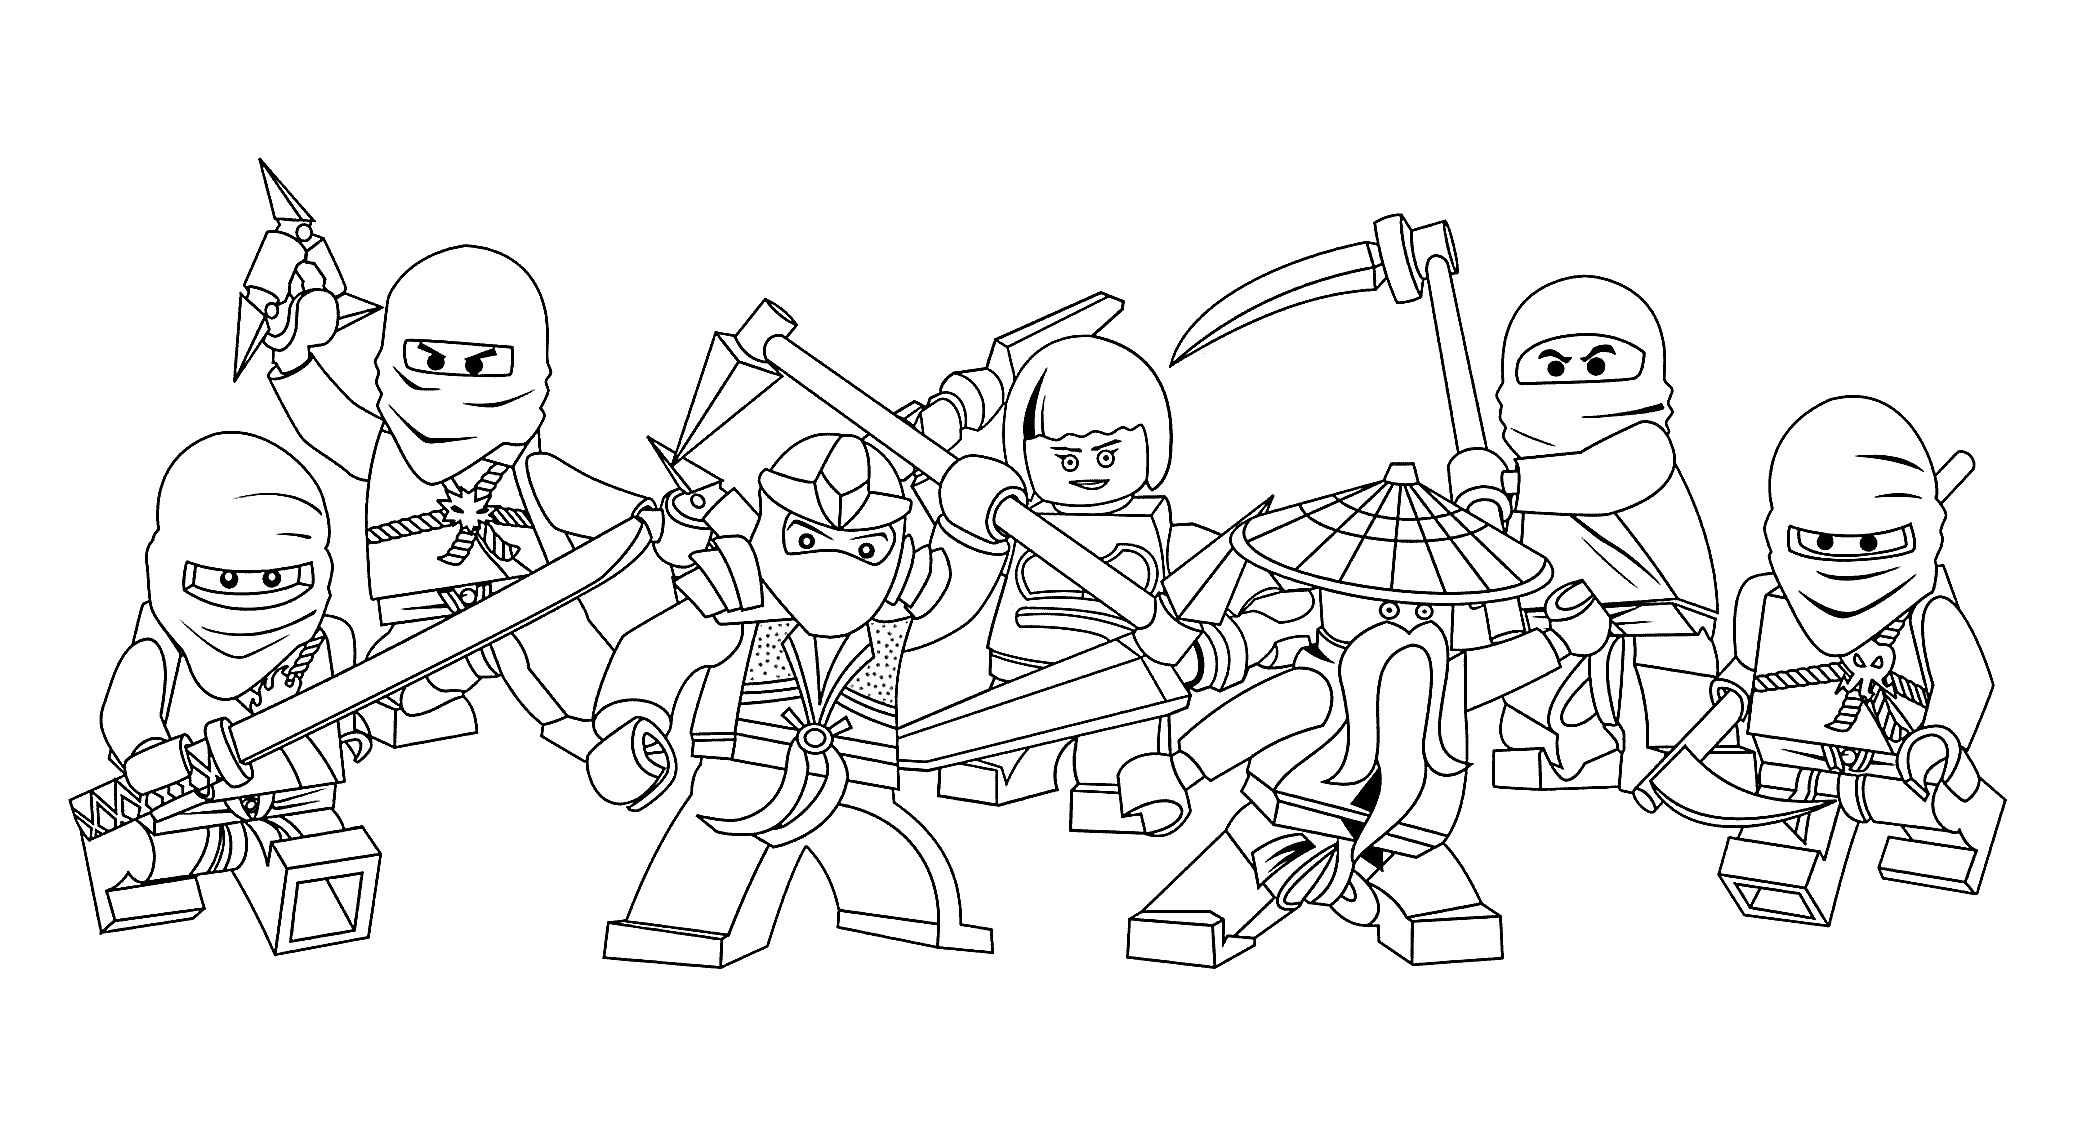 Free Printable Lego Ninjago Coloring Pages   Coloring Home - bestcoloring-pages.com